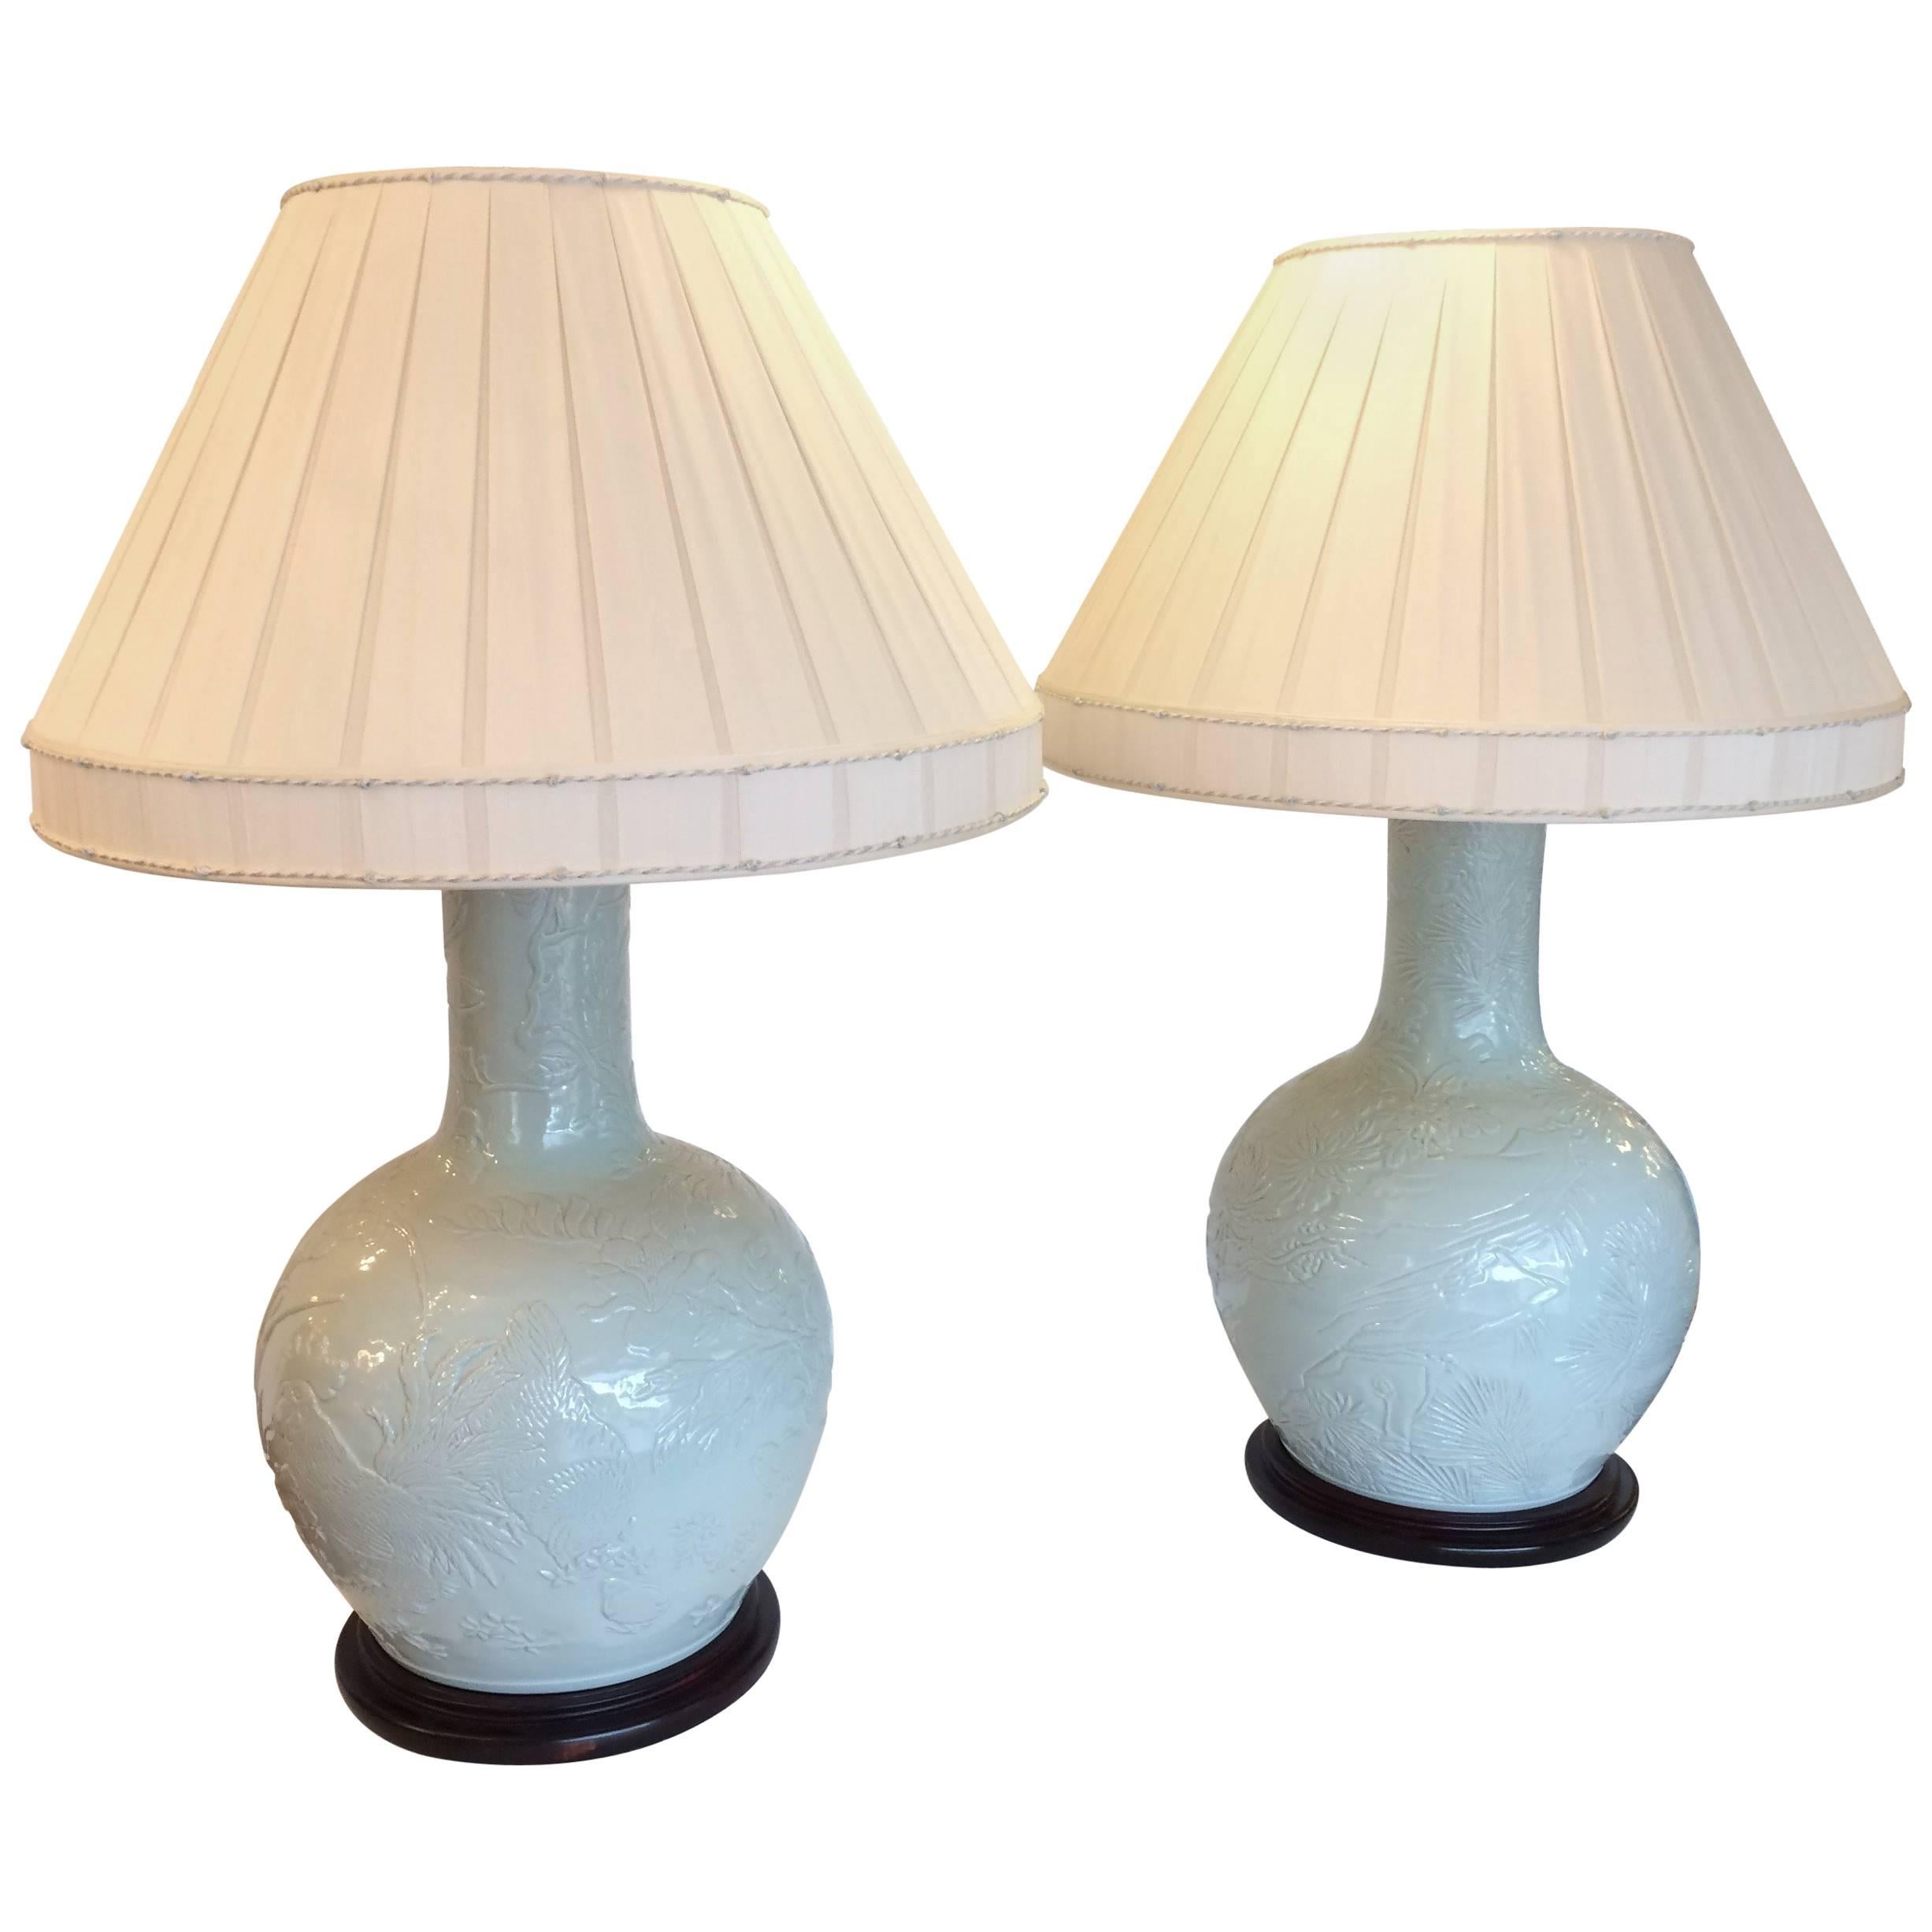 Monumentally Large Impressive Pair of Celadon Chinese Table Lamps For Sale